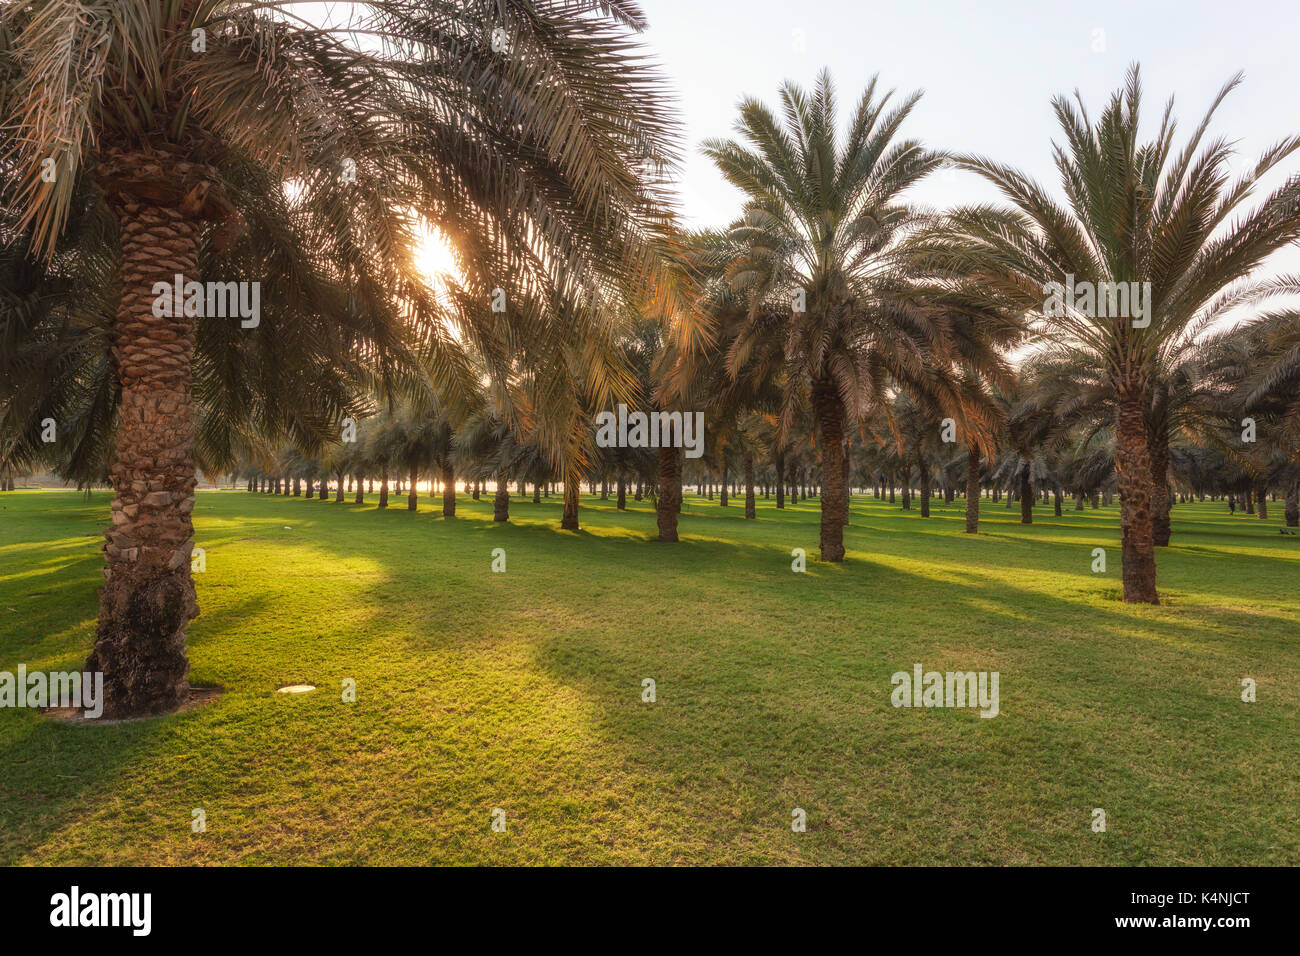 Orchard with palm date trees with green garden in Dubai, UAE Stock Photo